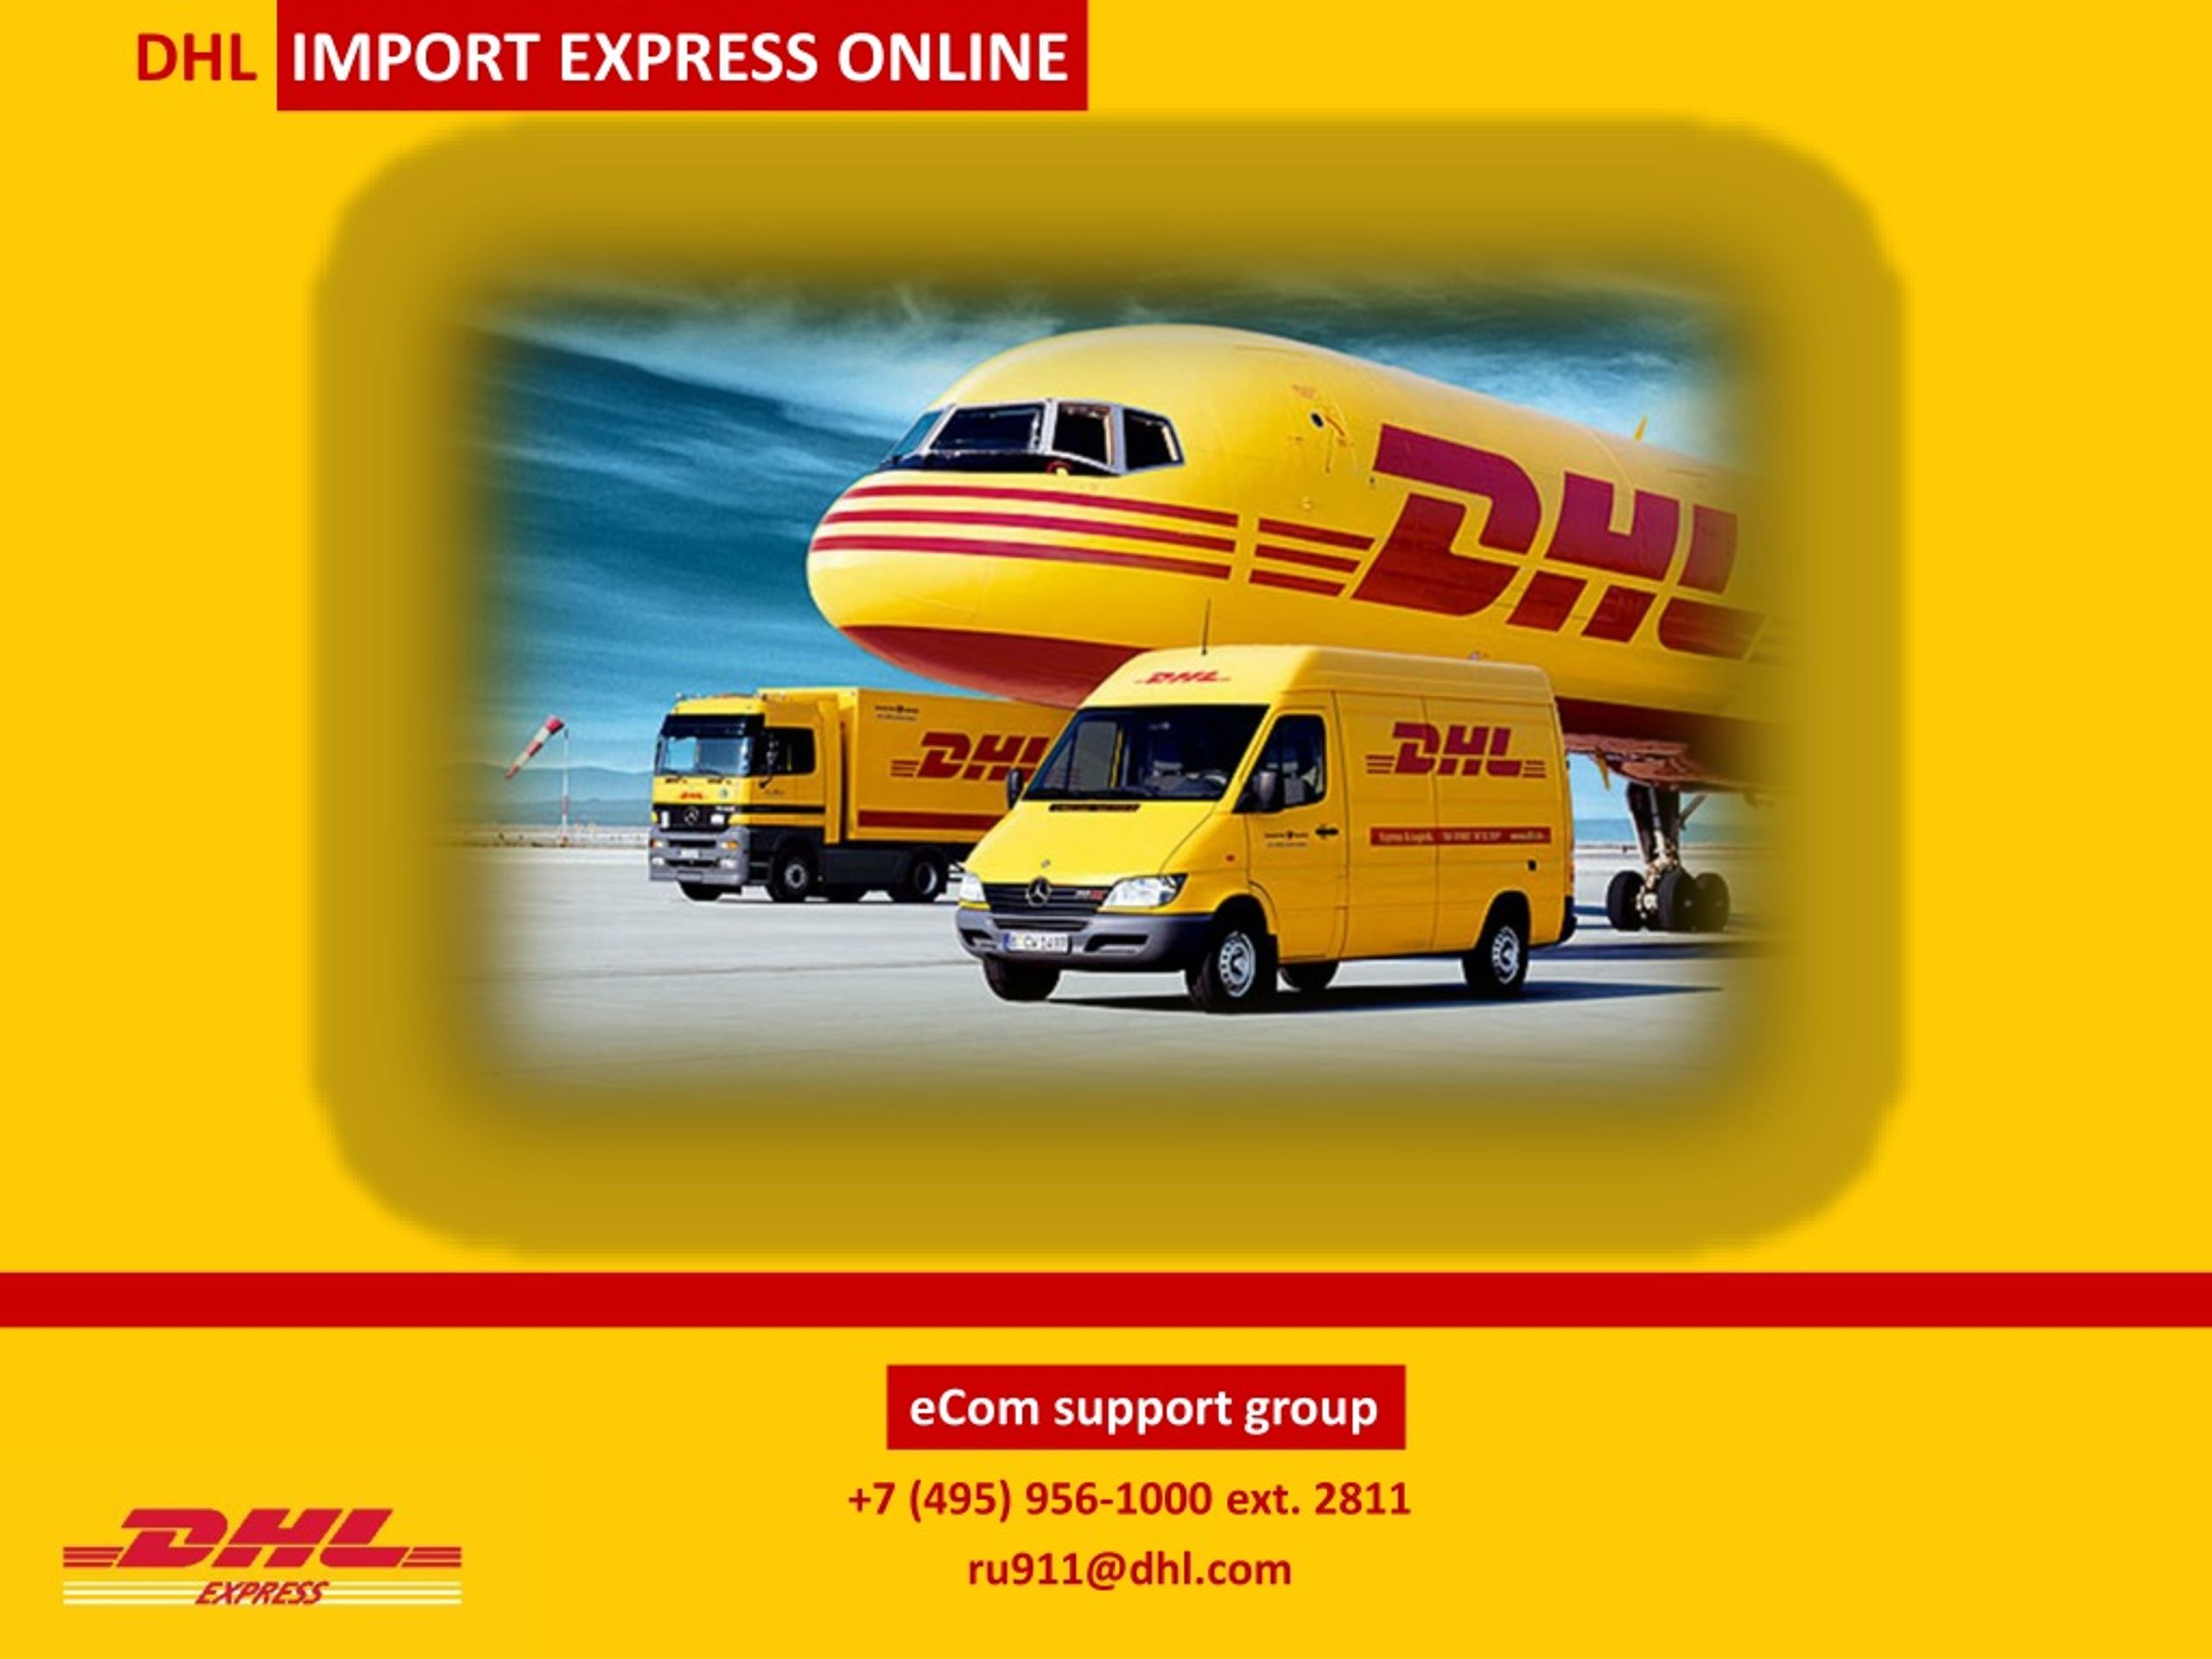 PPT - DHL IMPORT EXPRESS ONLINE PowerPoint Presentation, free download ...